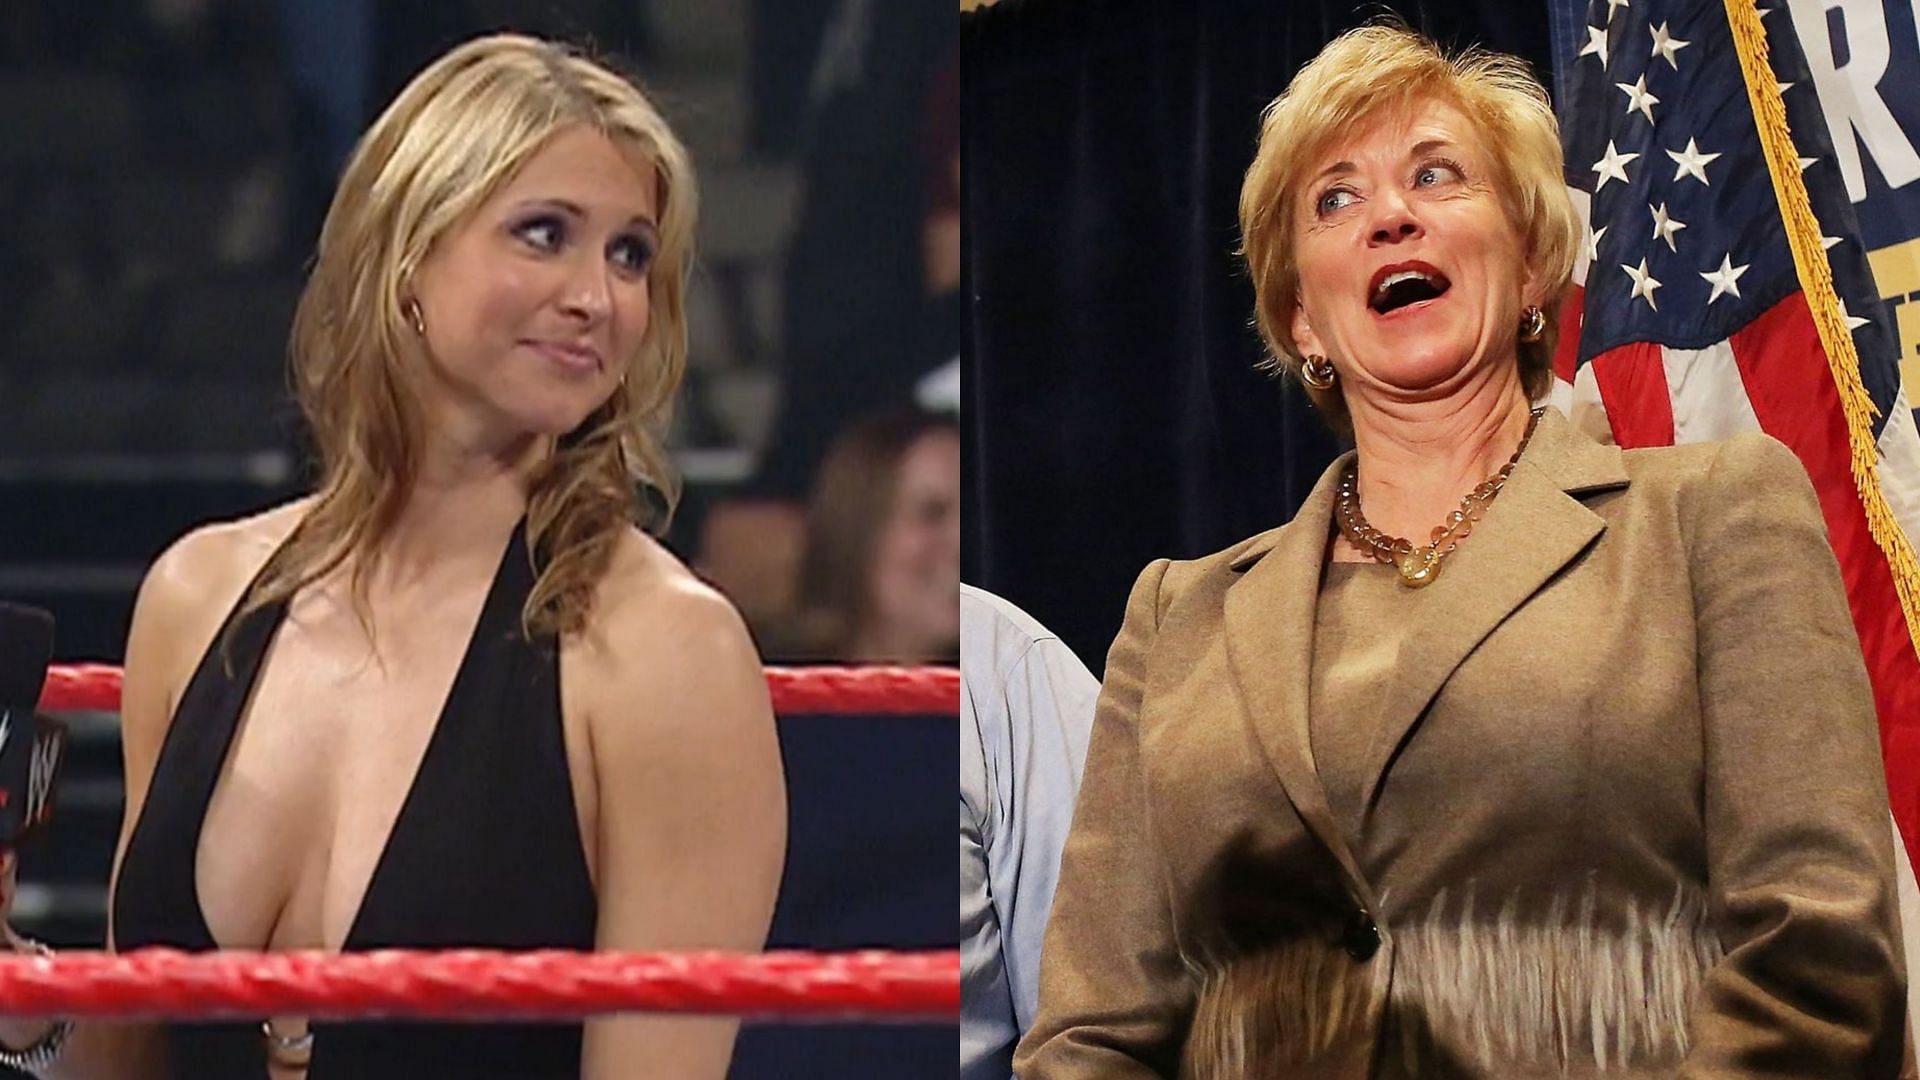 Former WWE Chairwoman Stephanie McMahon (left) and former CEO Linda McMahon (right)